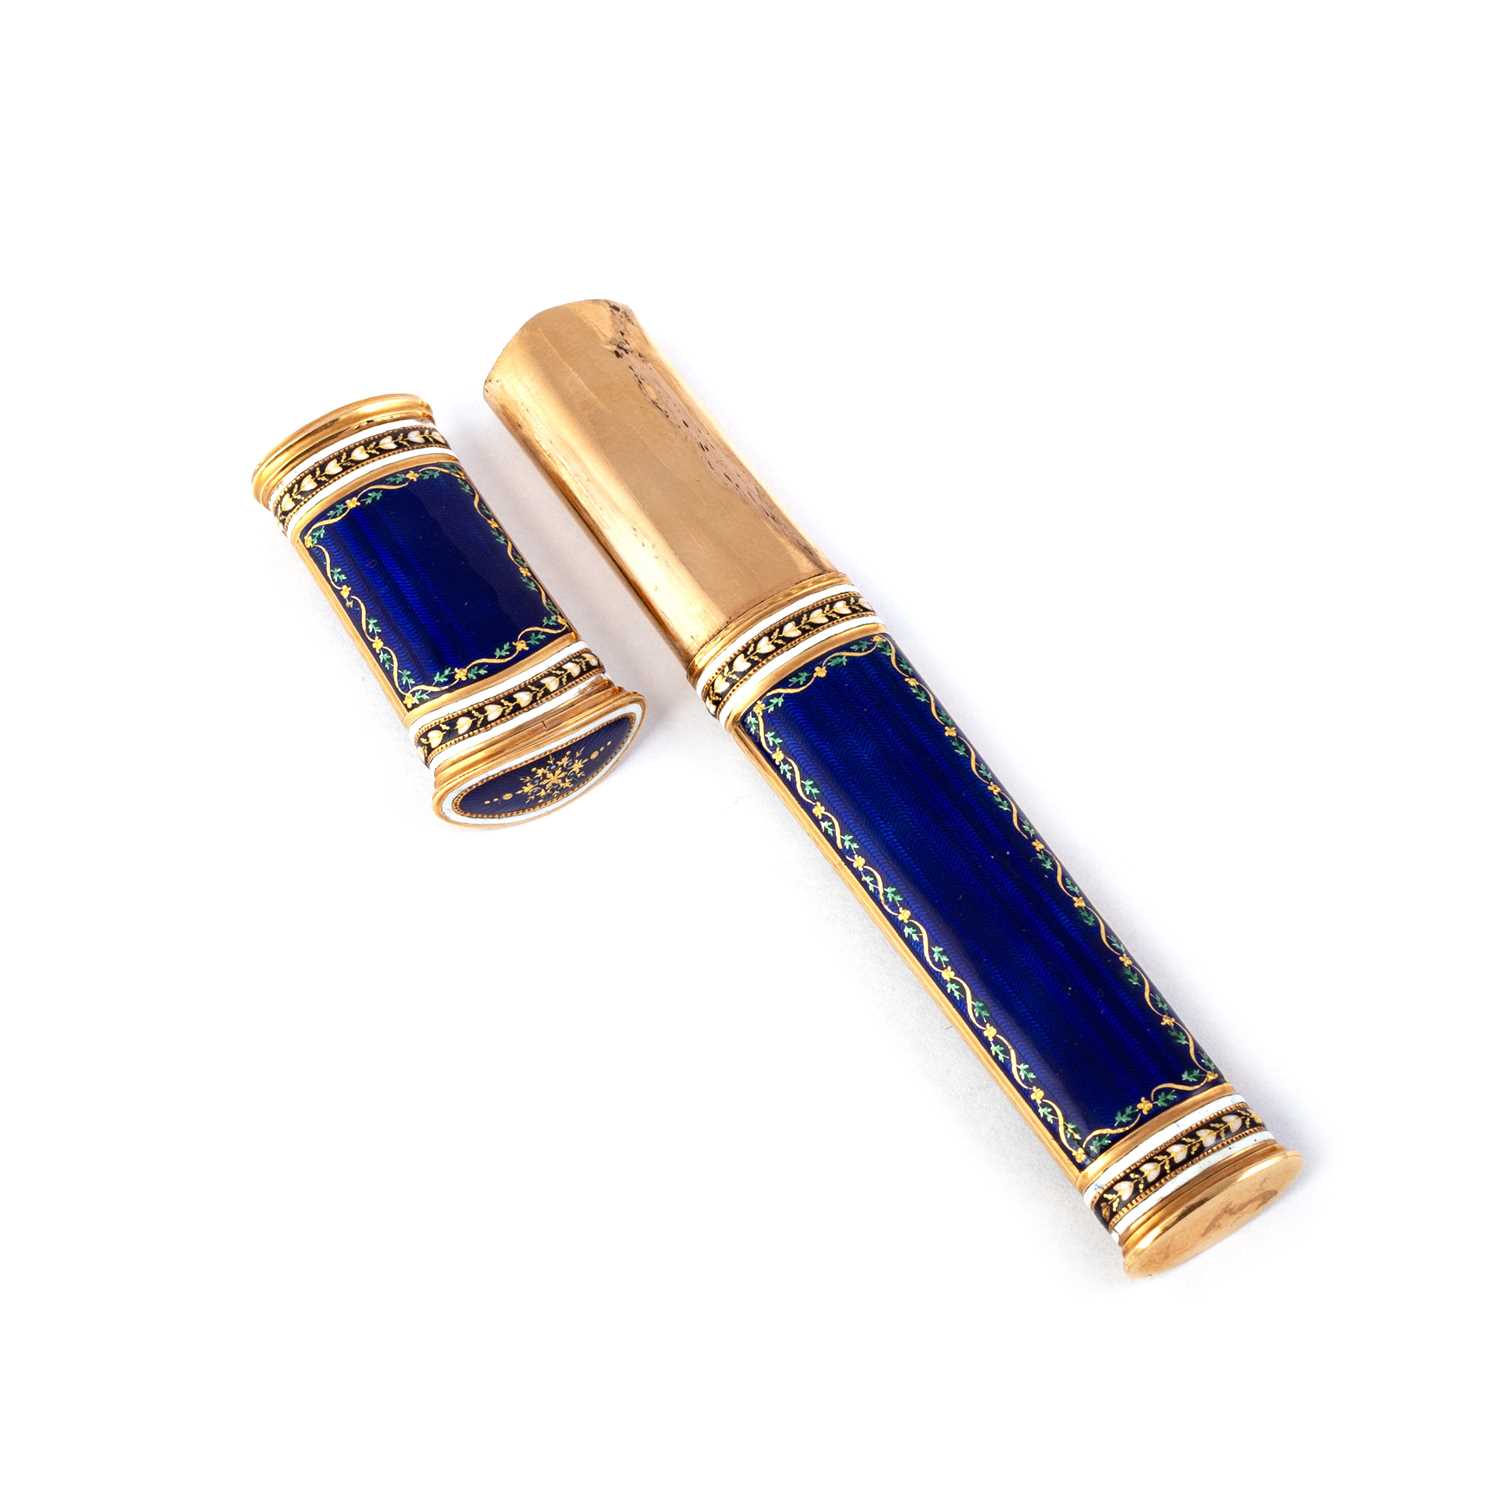 AN EARLY 19TH CENTURY SWISS GOLD AND ENAMEL SEALING WAX CASE - Image 2 of 2